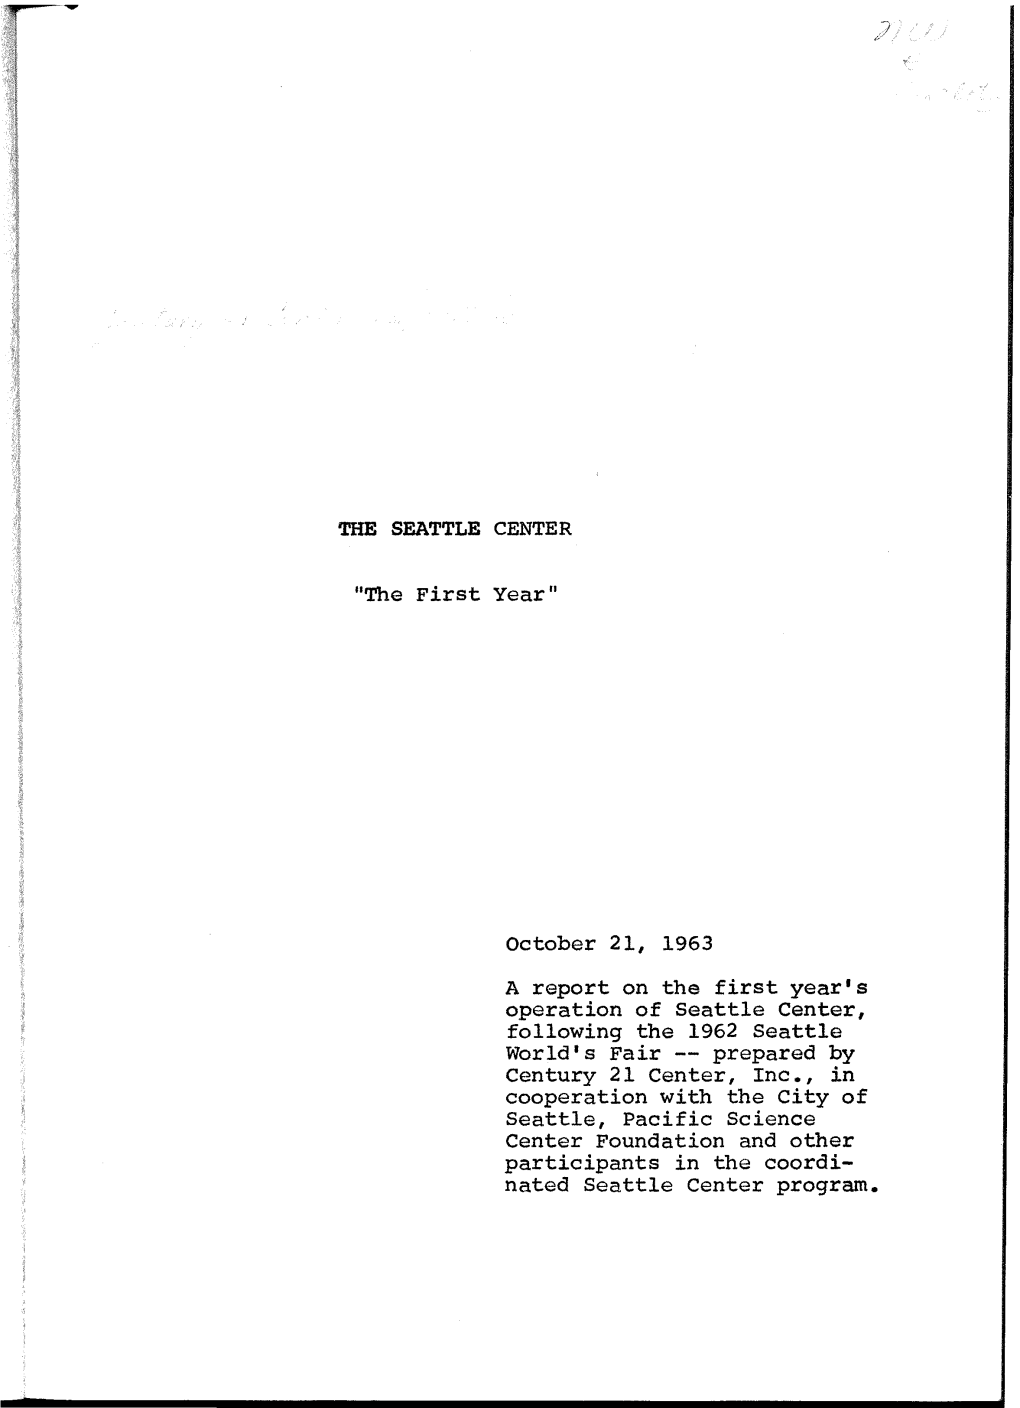 October 21, 1963 a Report on the First Year's Operation of Seattle Center